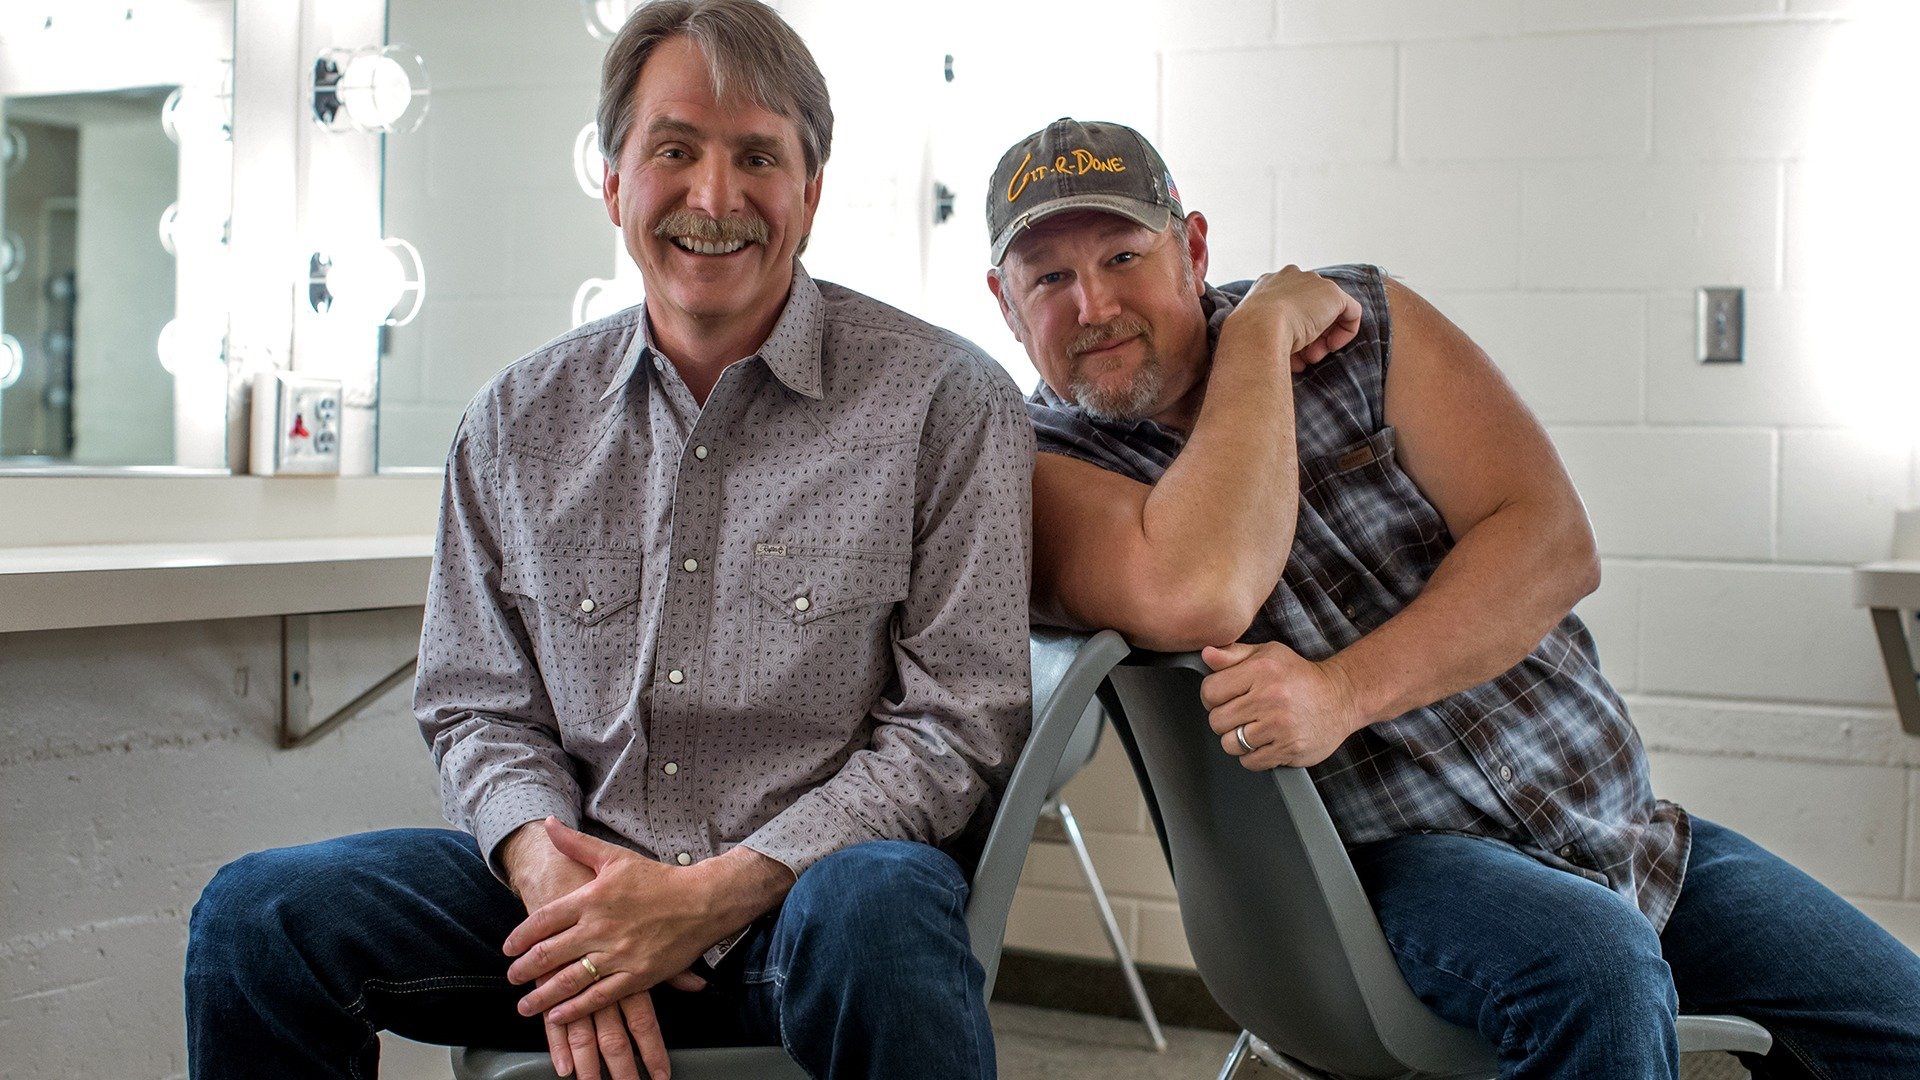 Jeff Foxworthy & Larry the Cable Guy: We've Been Thinking Backdrop